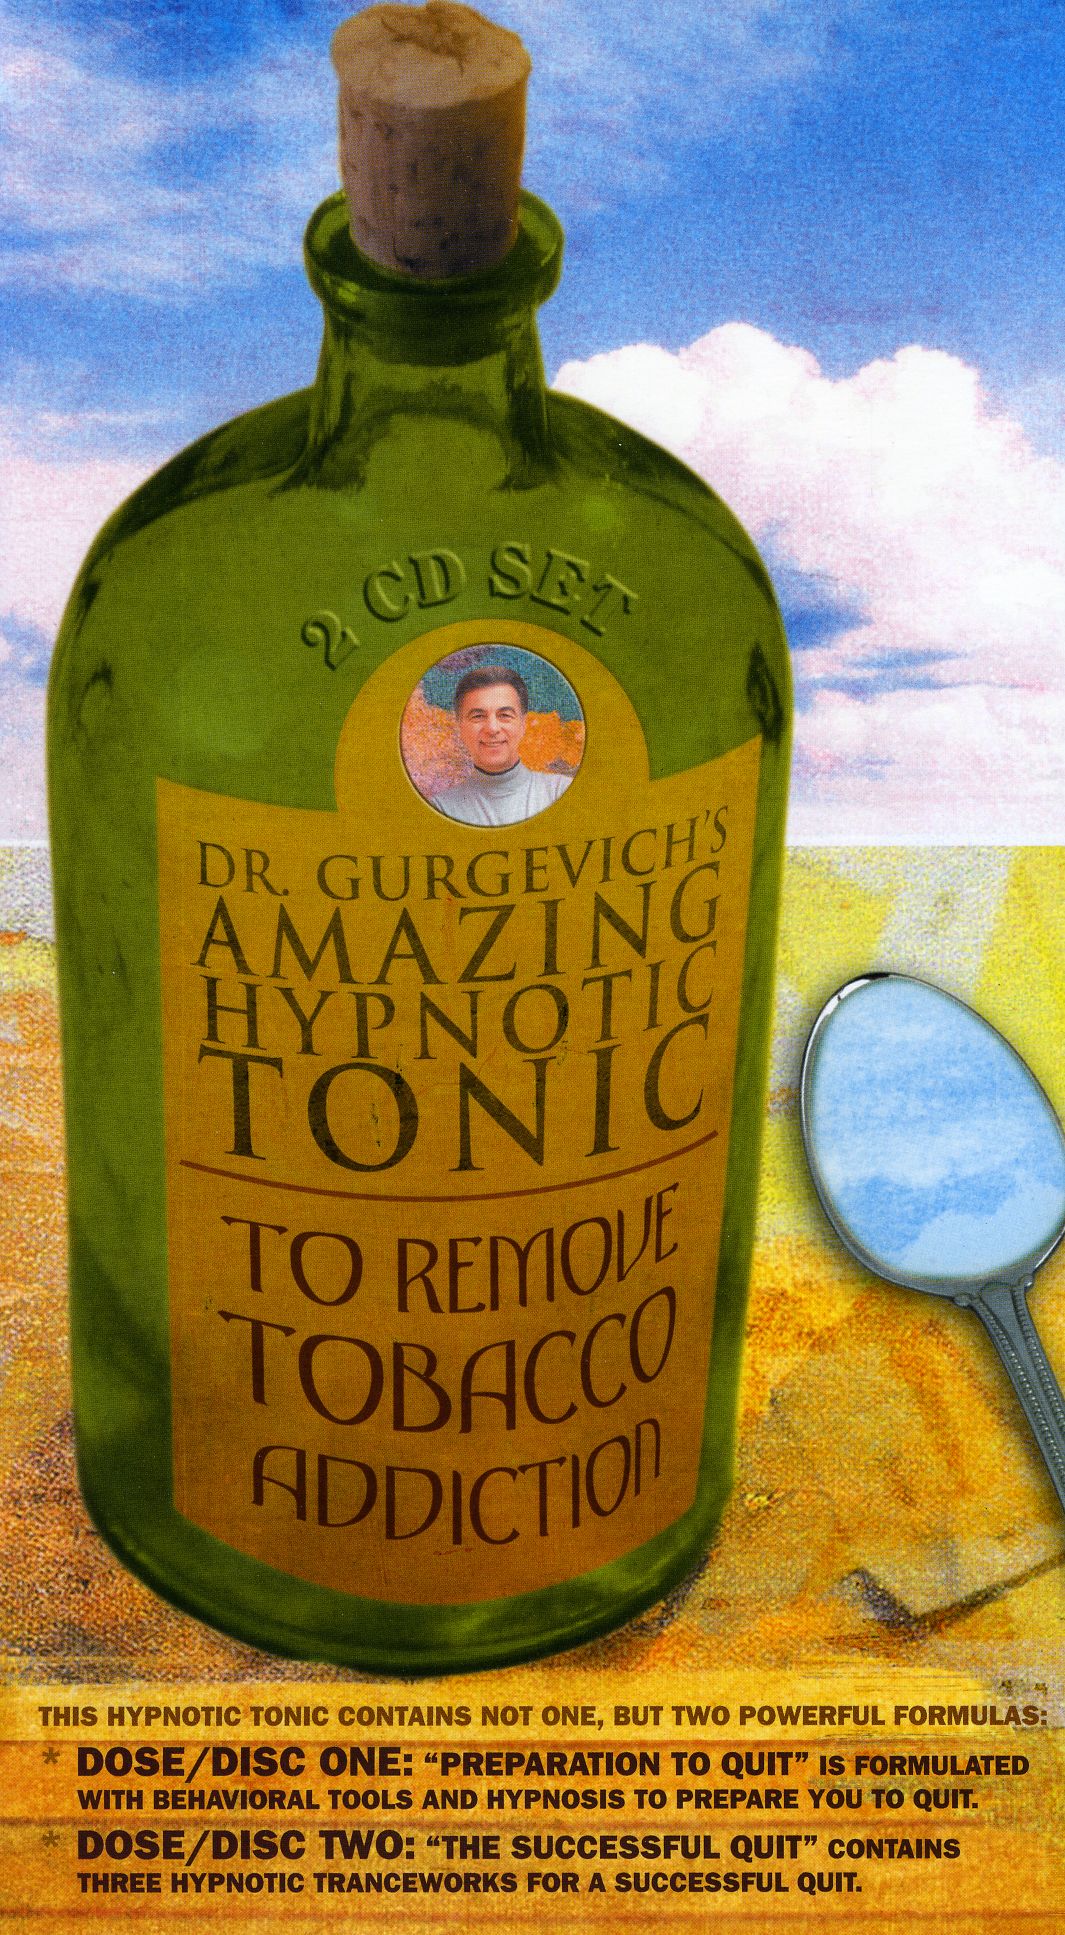 AMAZING HYPNOTIC TONIC TO CURE TOBACCO